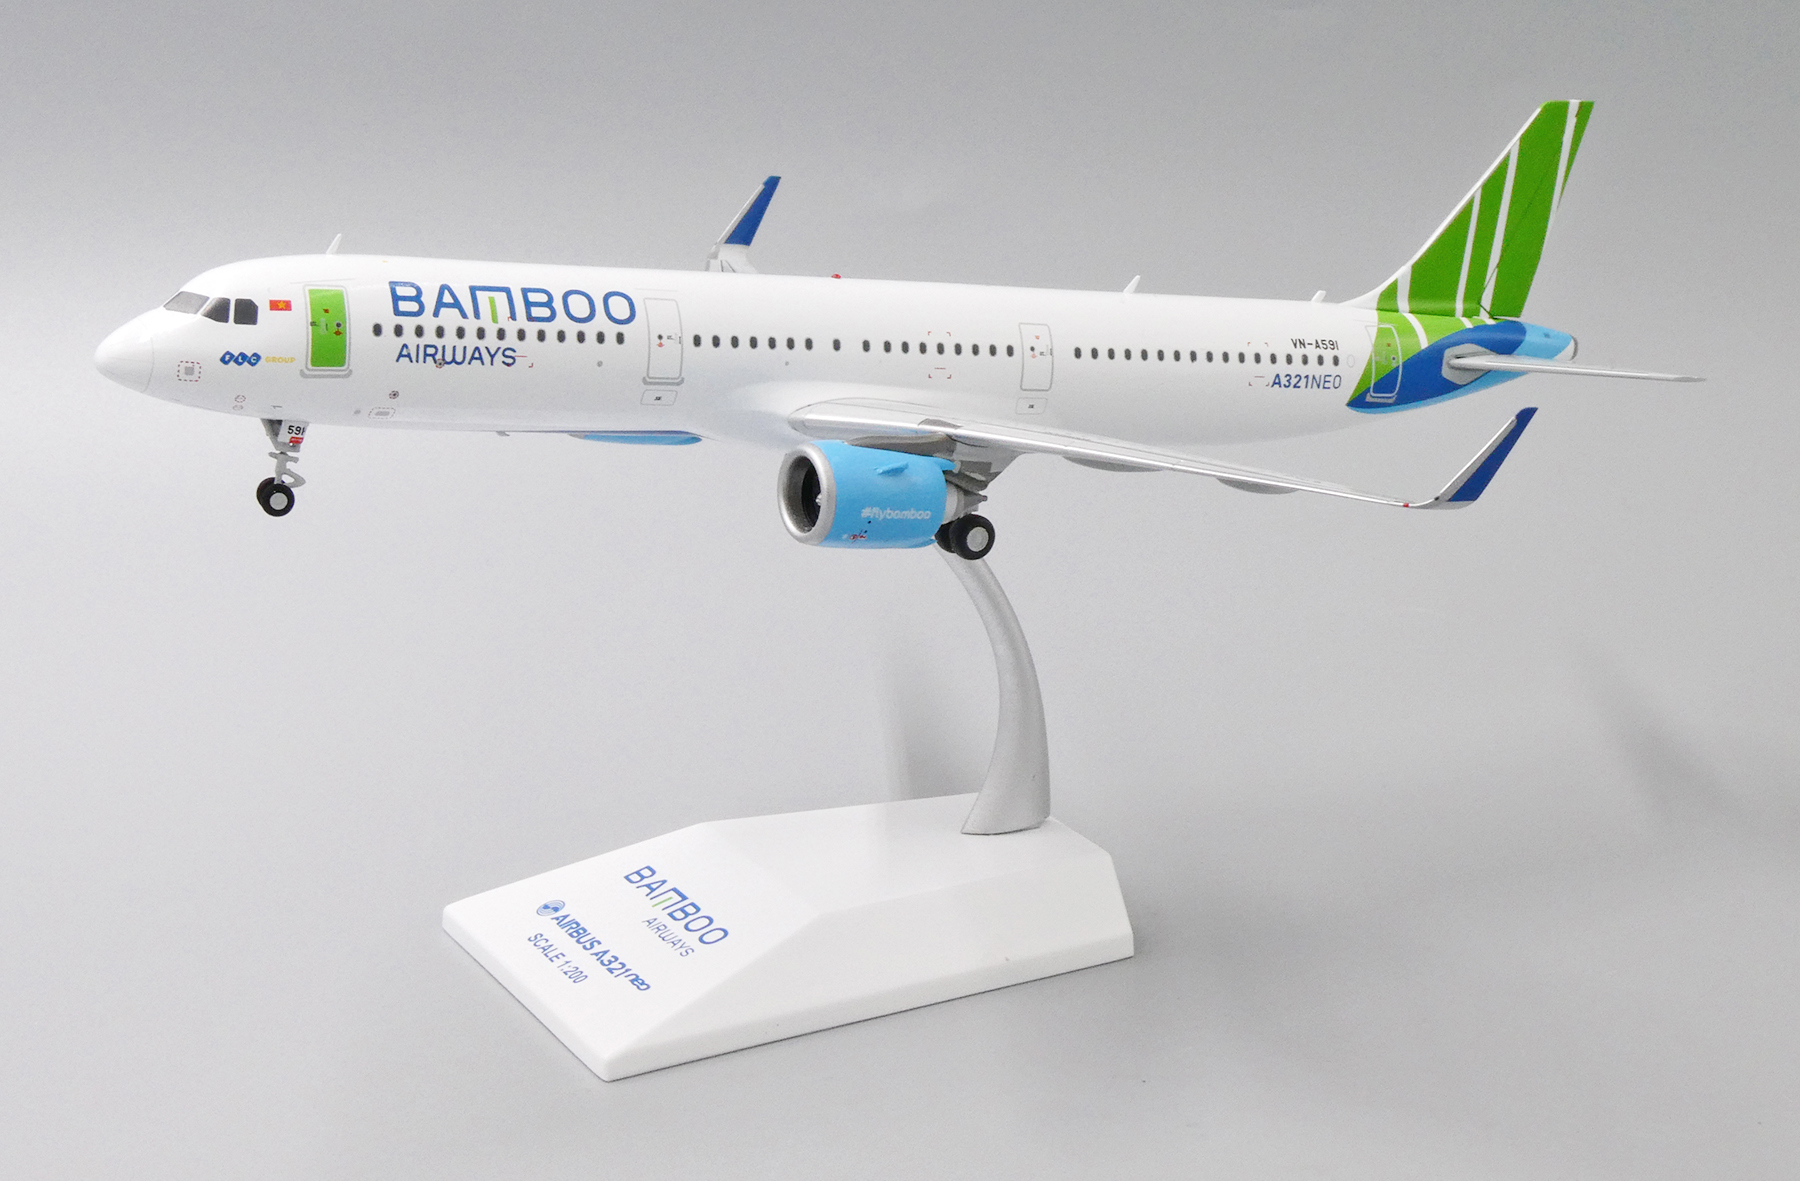 JCWINGS JCLH2215 1/200 AIRBUS INDUSTRIE AIRBUS A321NEO REG D-AVXA WITH STAND 